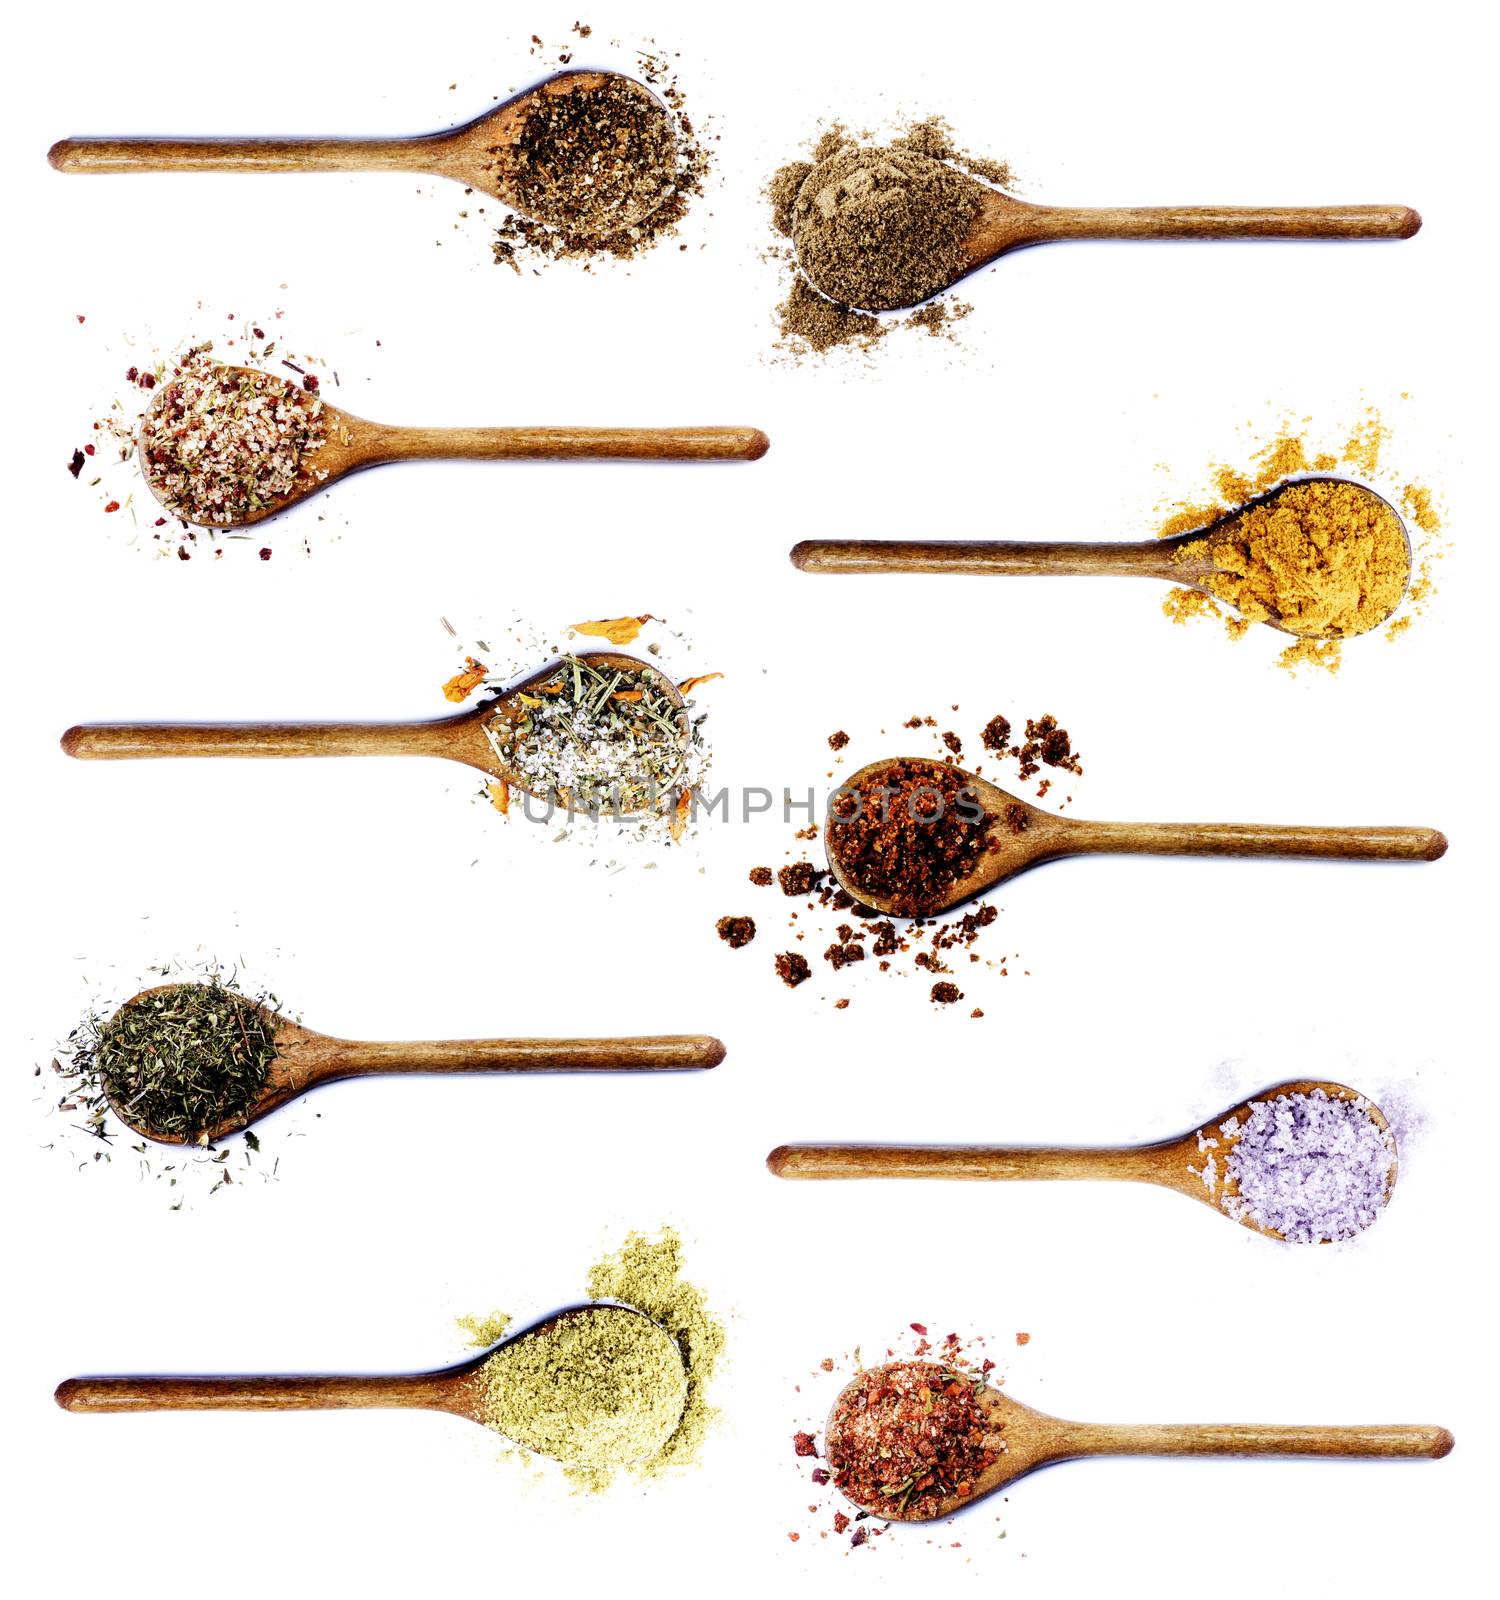 Collection of Spices by zhekos